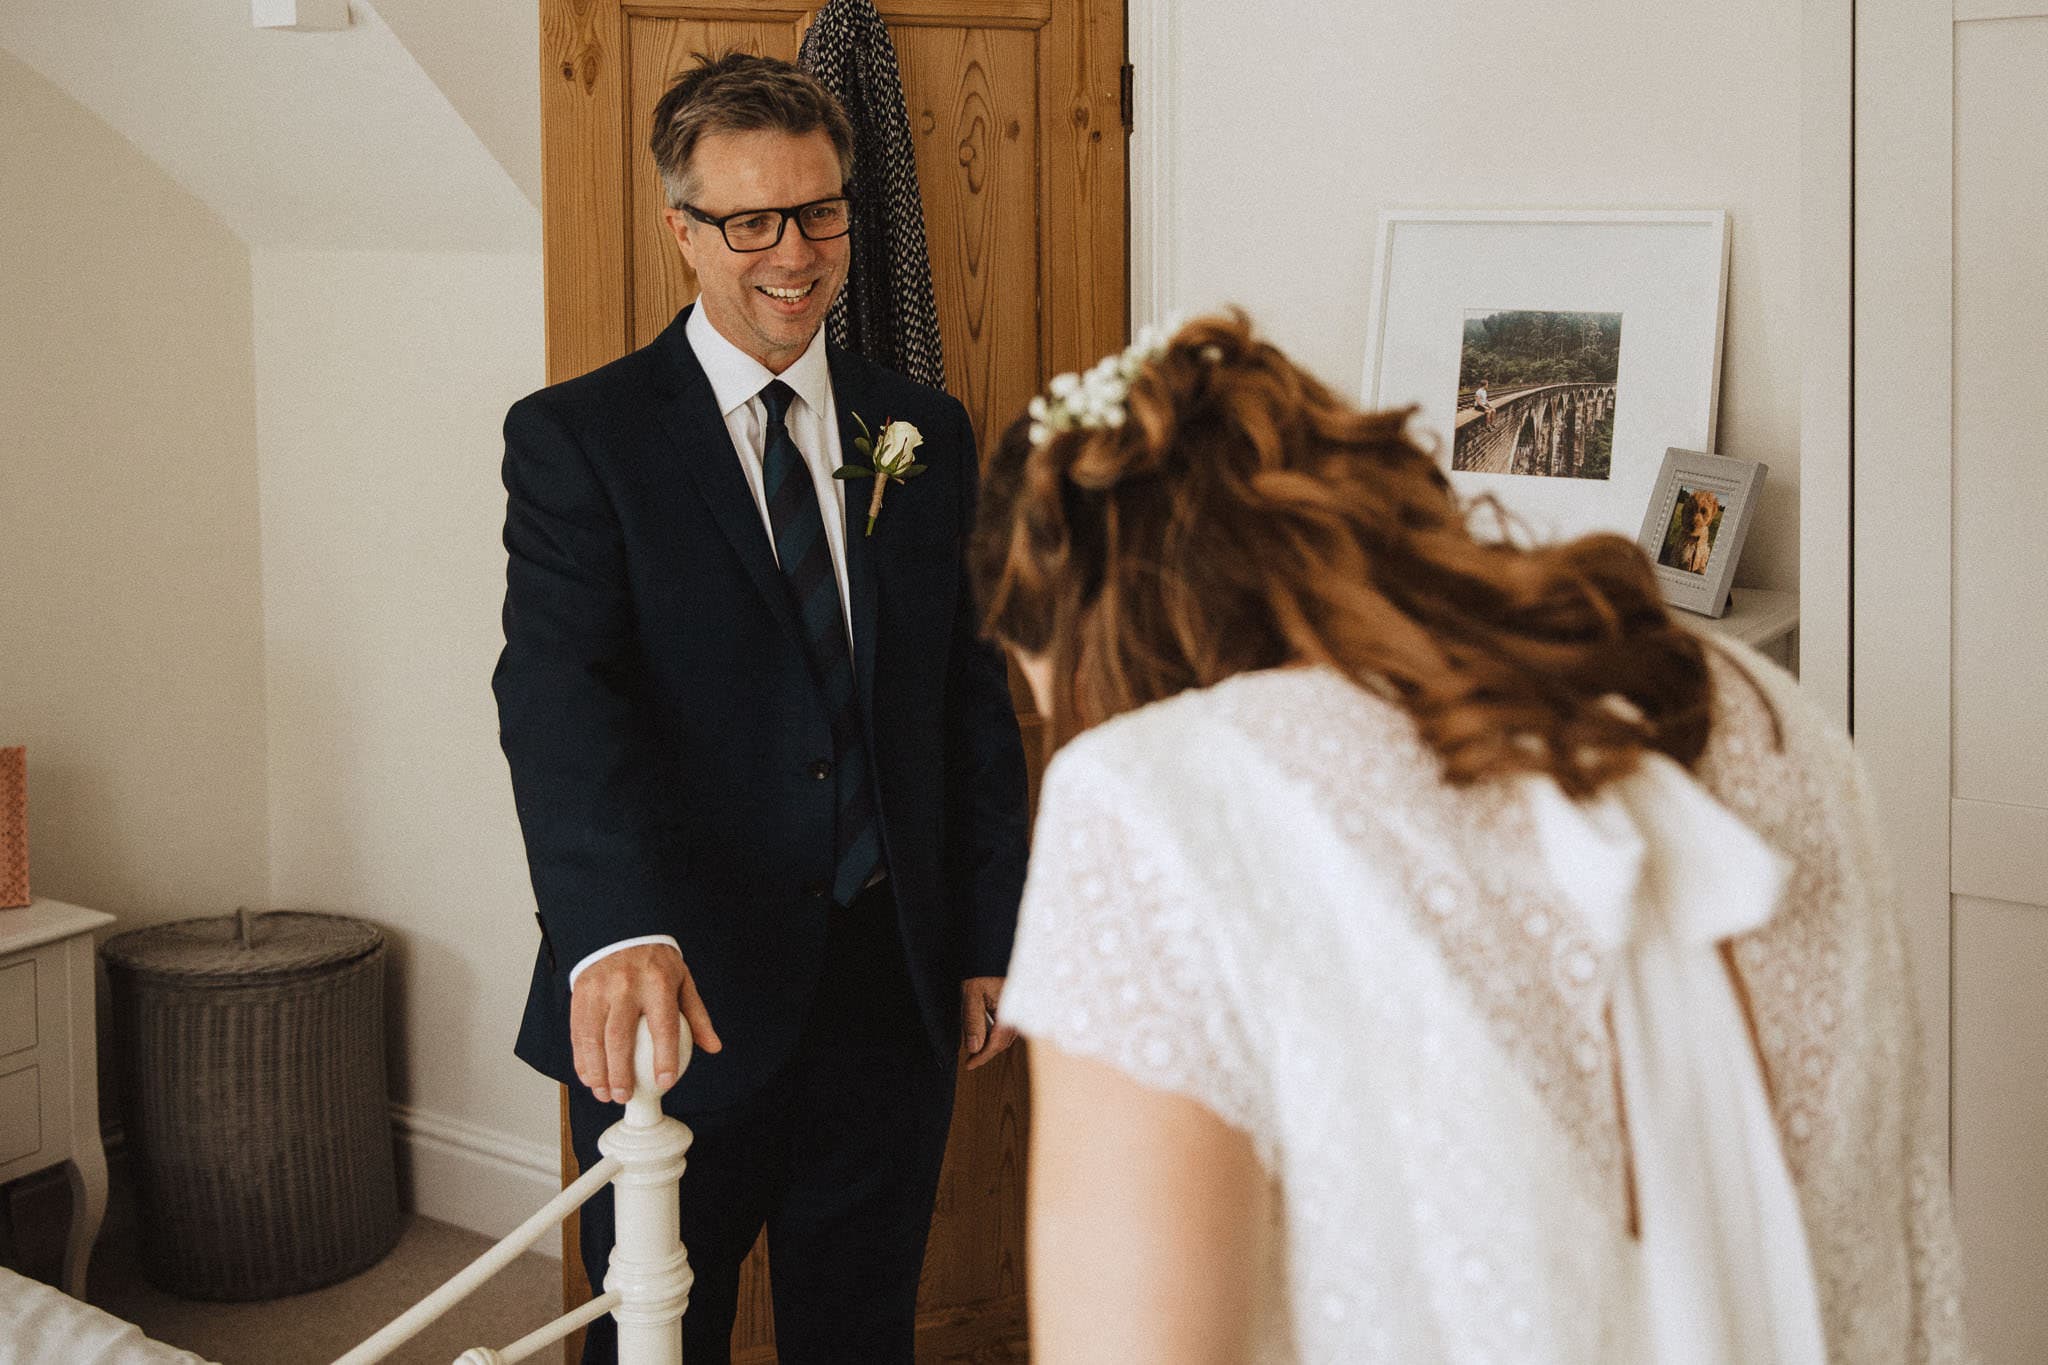 proud Dad sees daughter for first time on wedding day